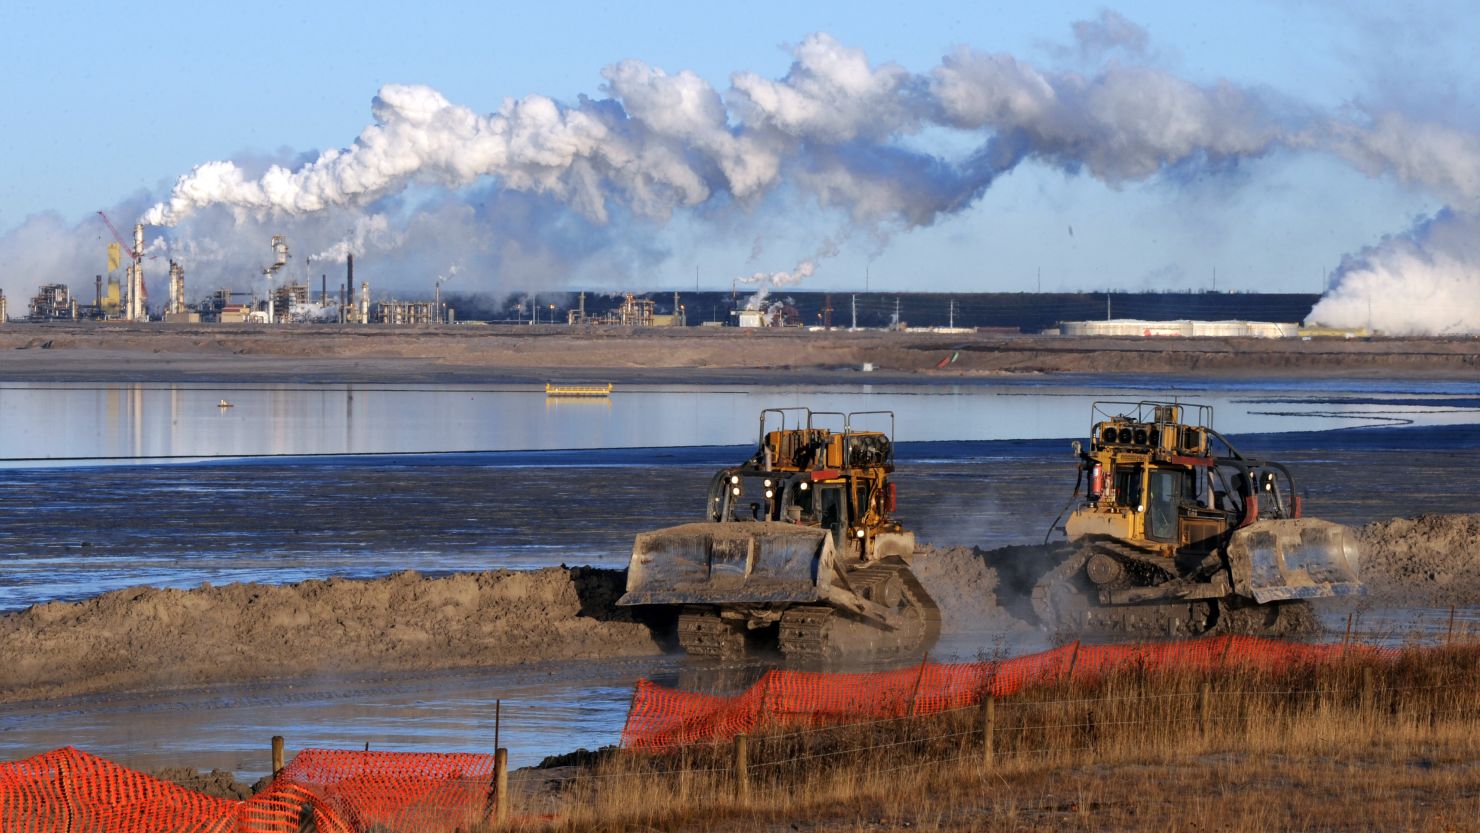 Workers use heavy machinery in the tailings pond at an oil sands extraction facility near Fort McMurray, Canada. 